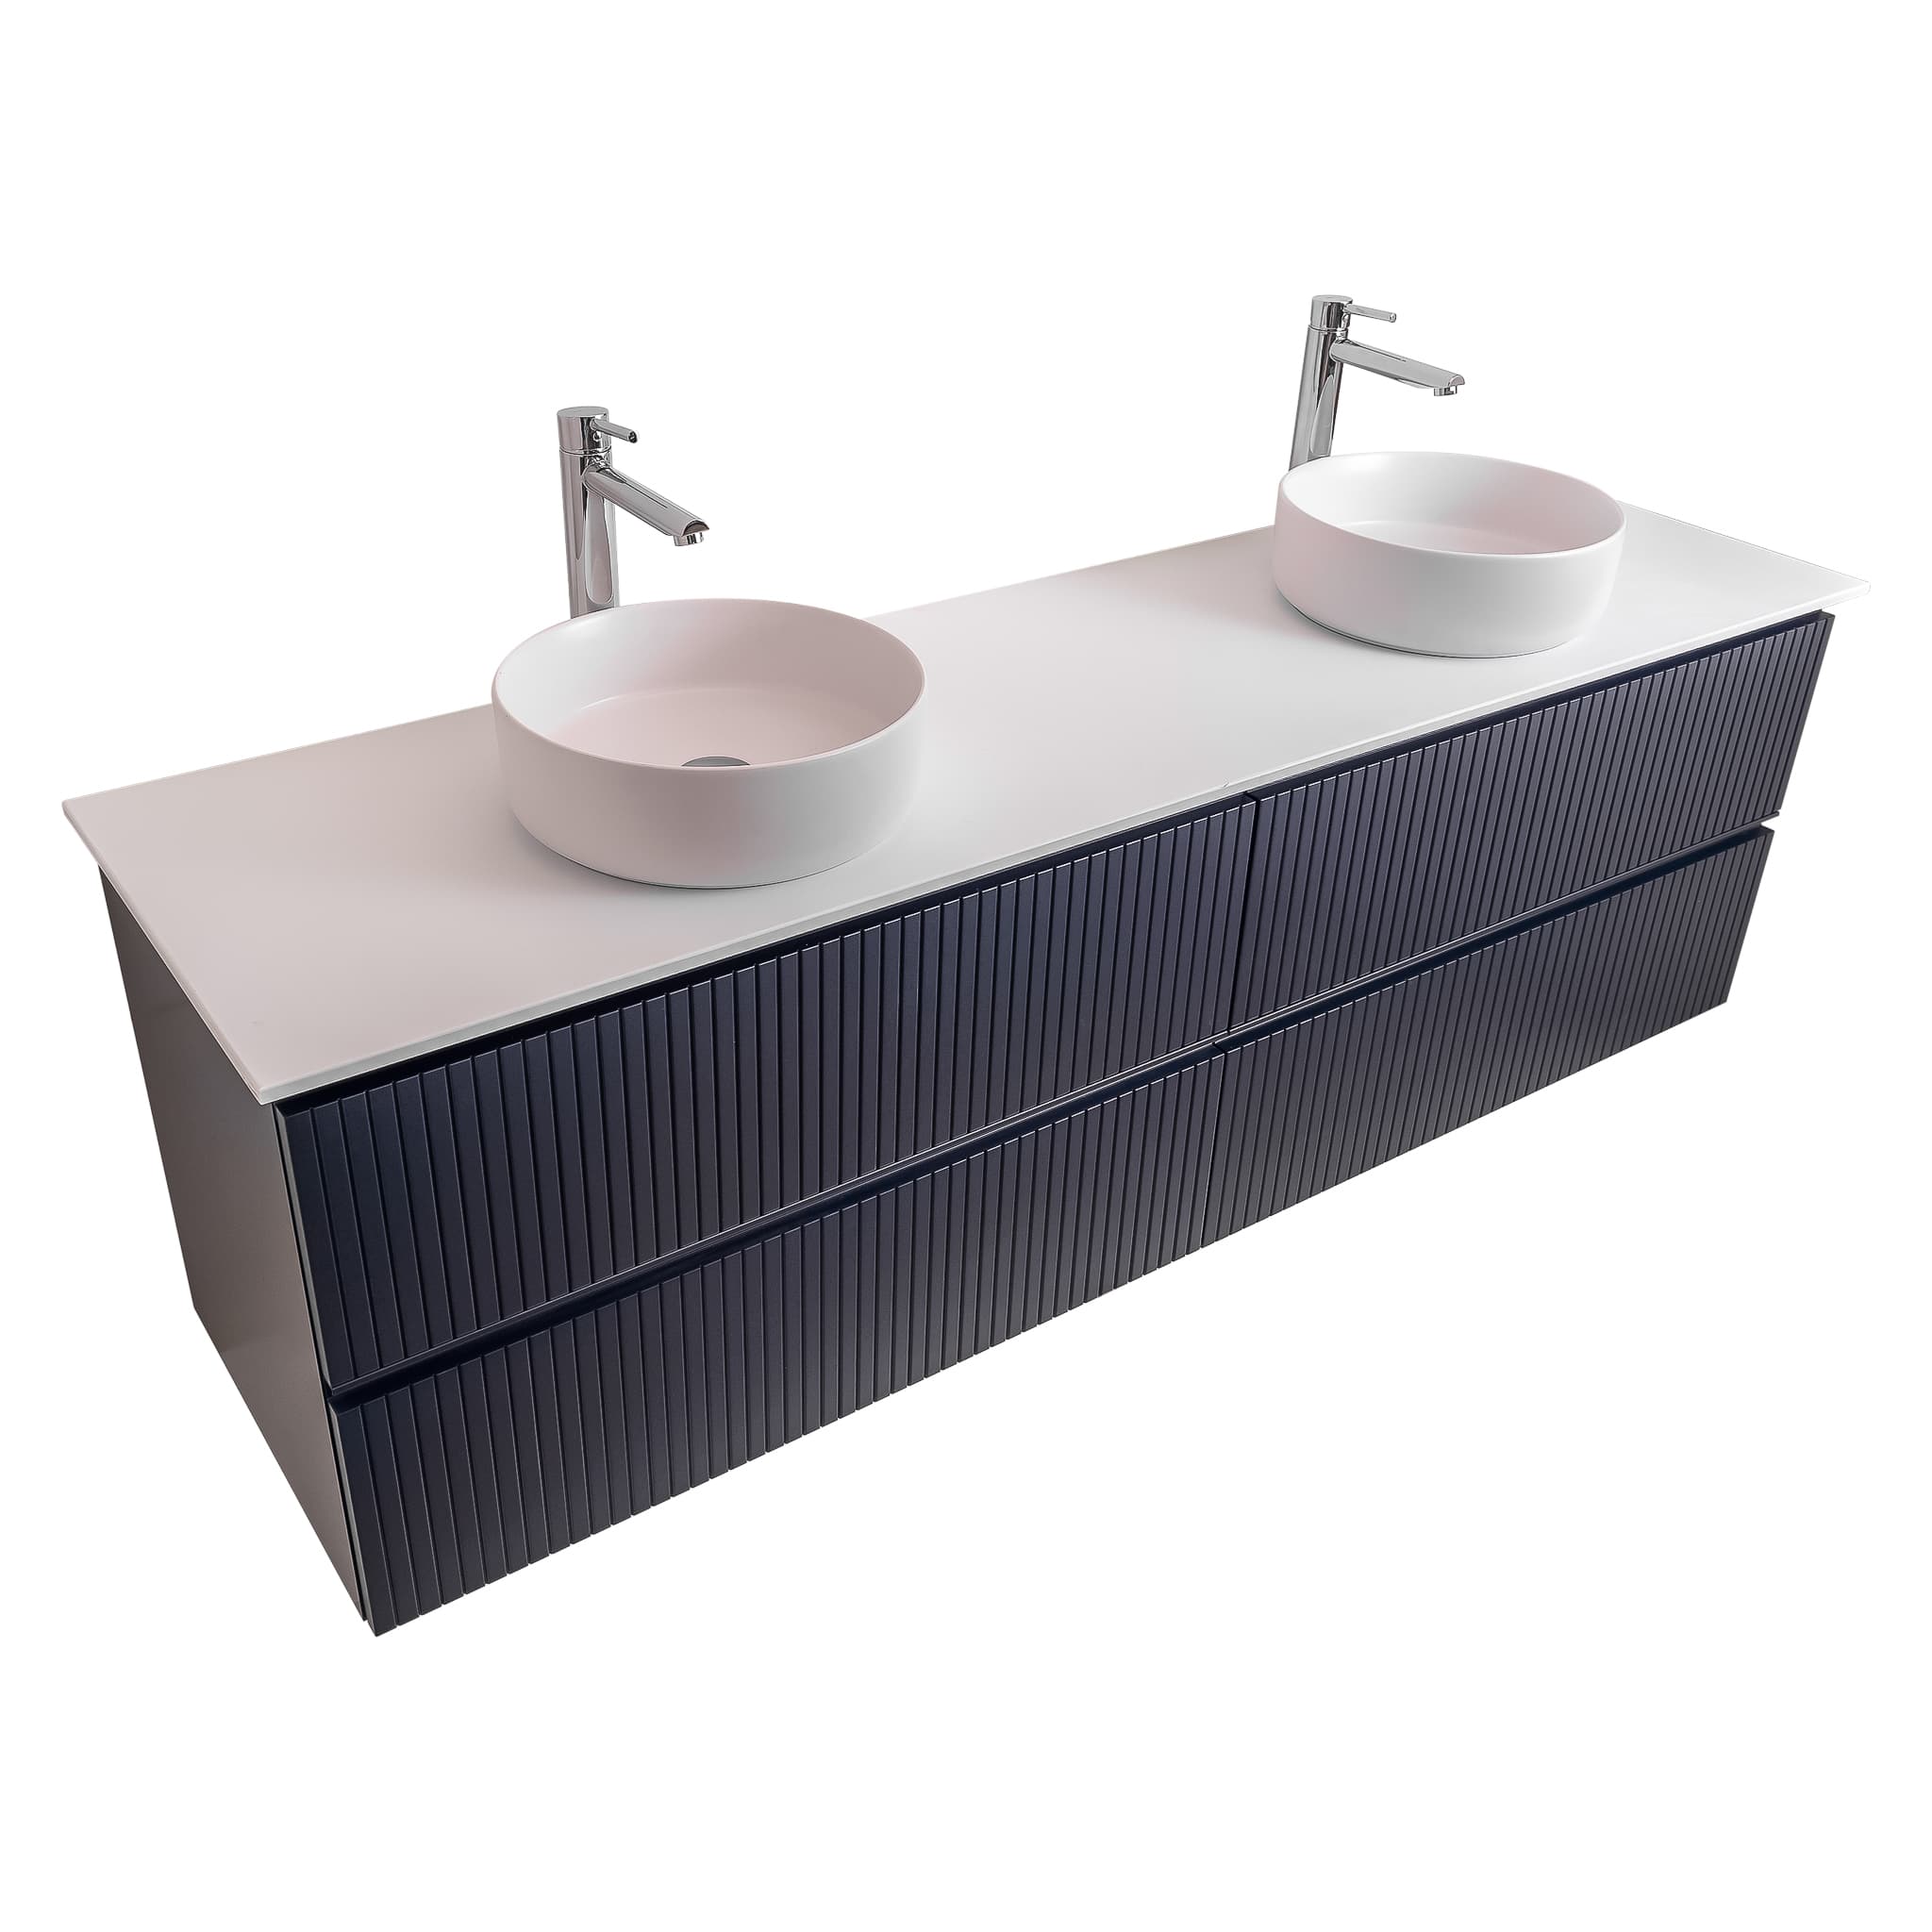 Ares 63 Matte Navy Blue Cabinet, Ares White Top And Two Ares White Ceramic Basin, Wall Mounted Modern Vanity Set